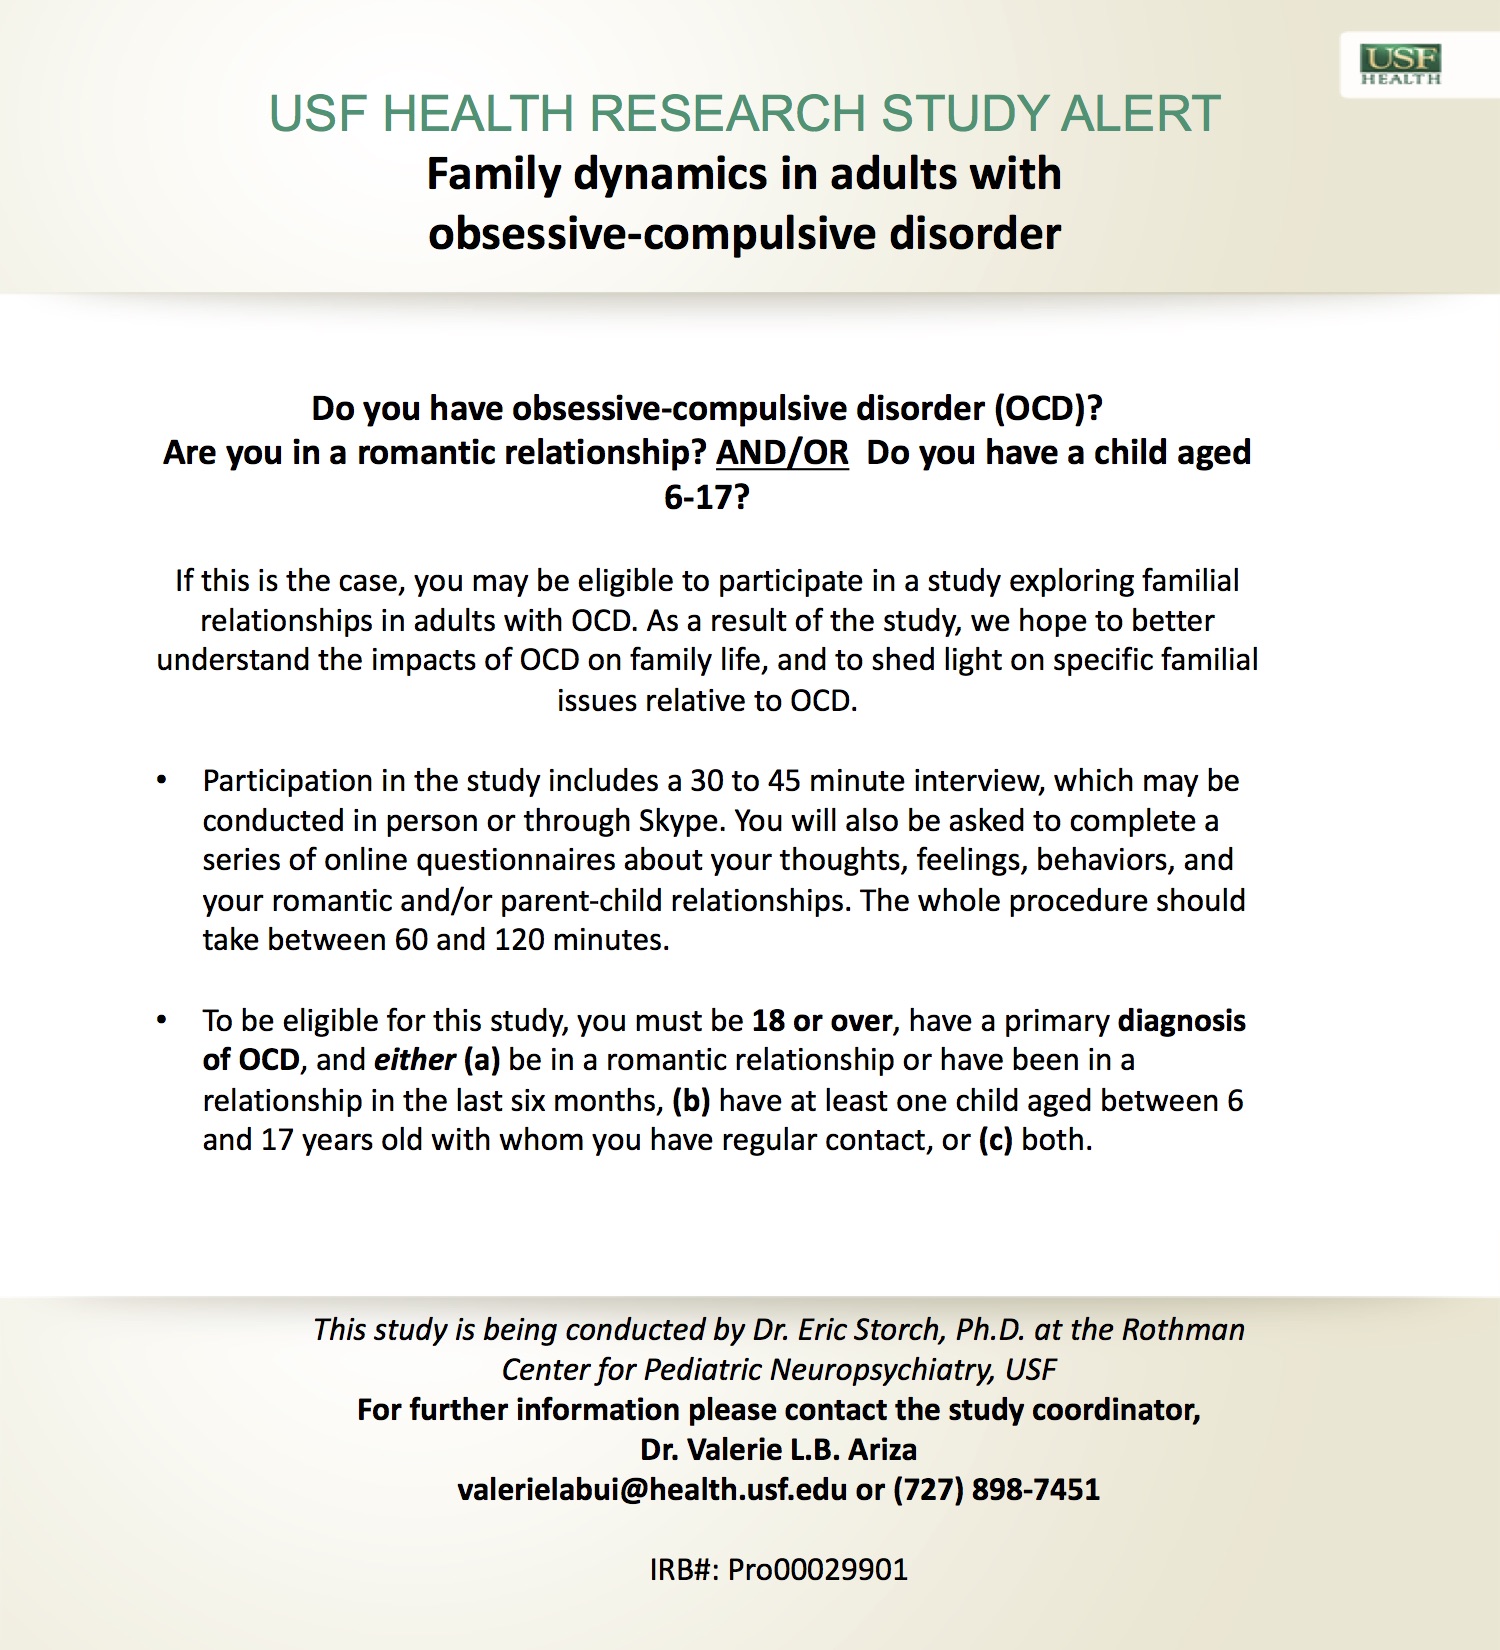 Family functioning in adults with OCD_Research _Study_Alert_USF_Version 1_03132017_clean